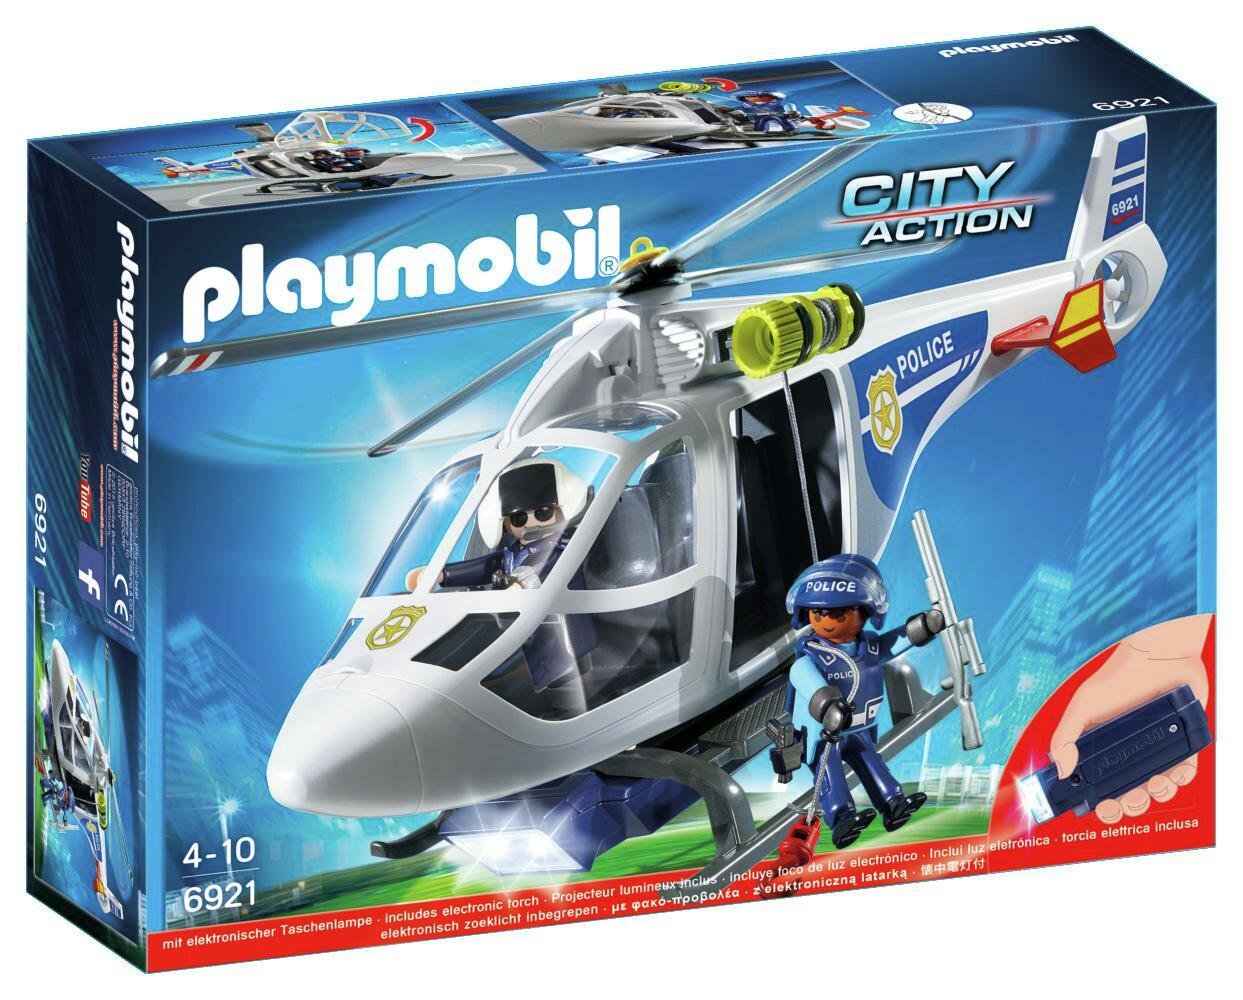 Playmobil 6921 City Action Police Helicopter Review